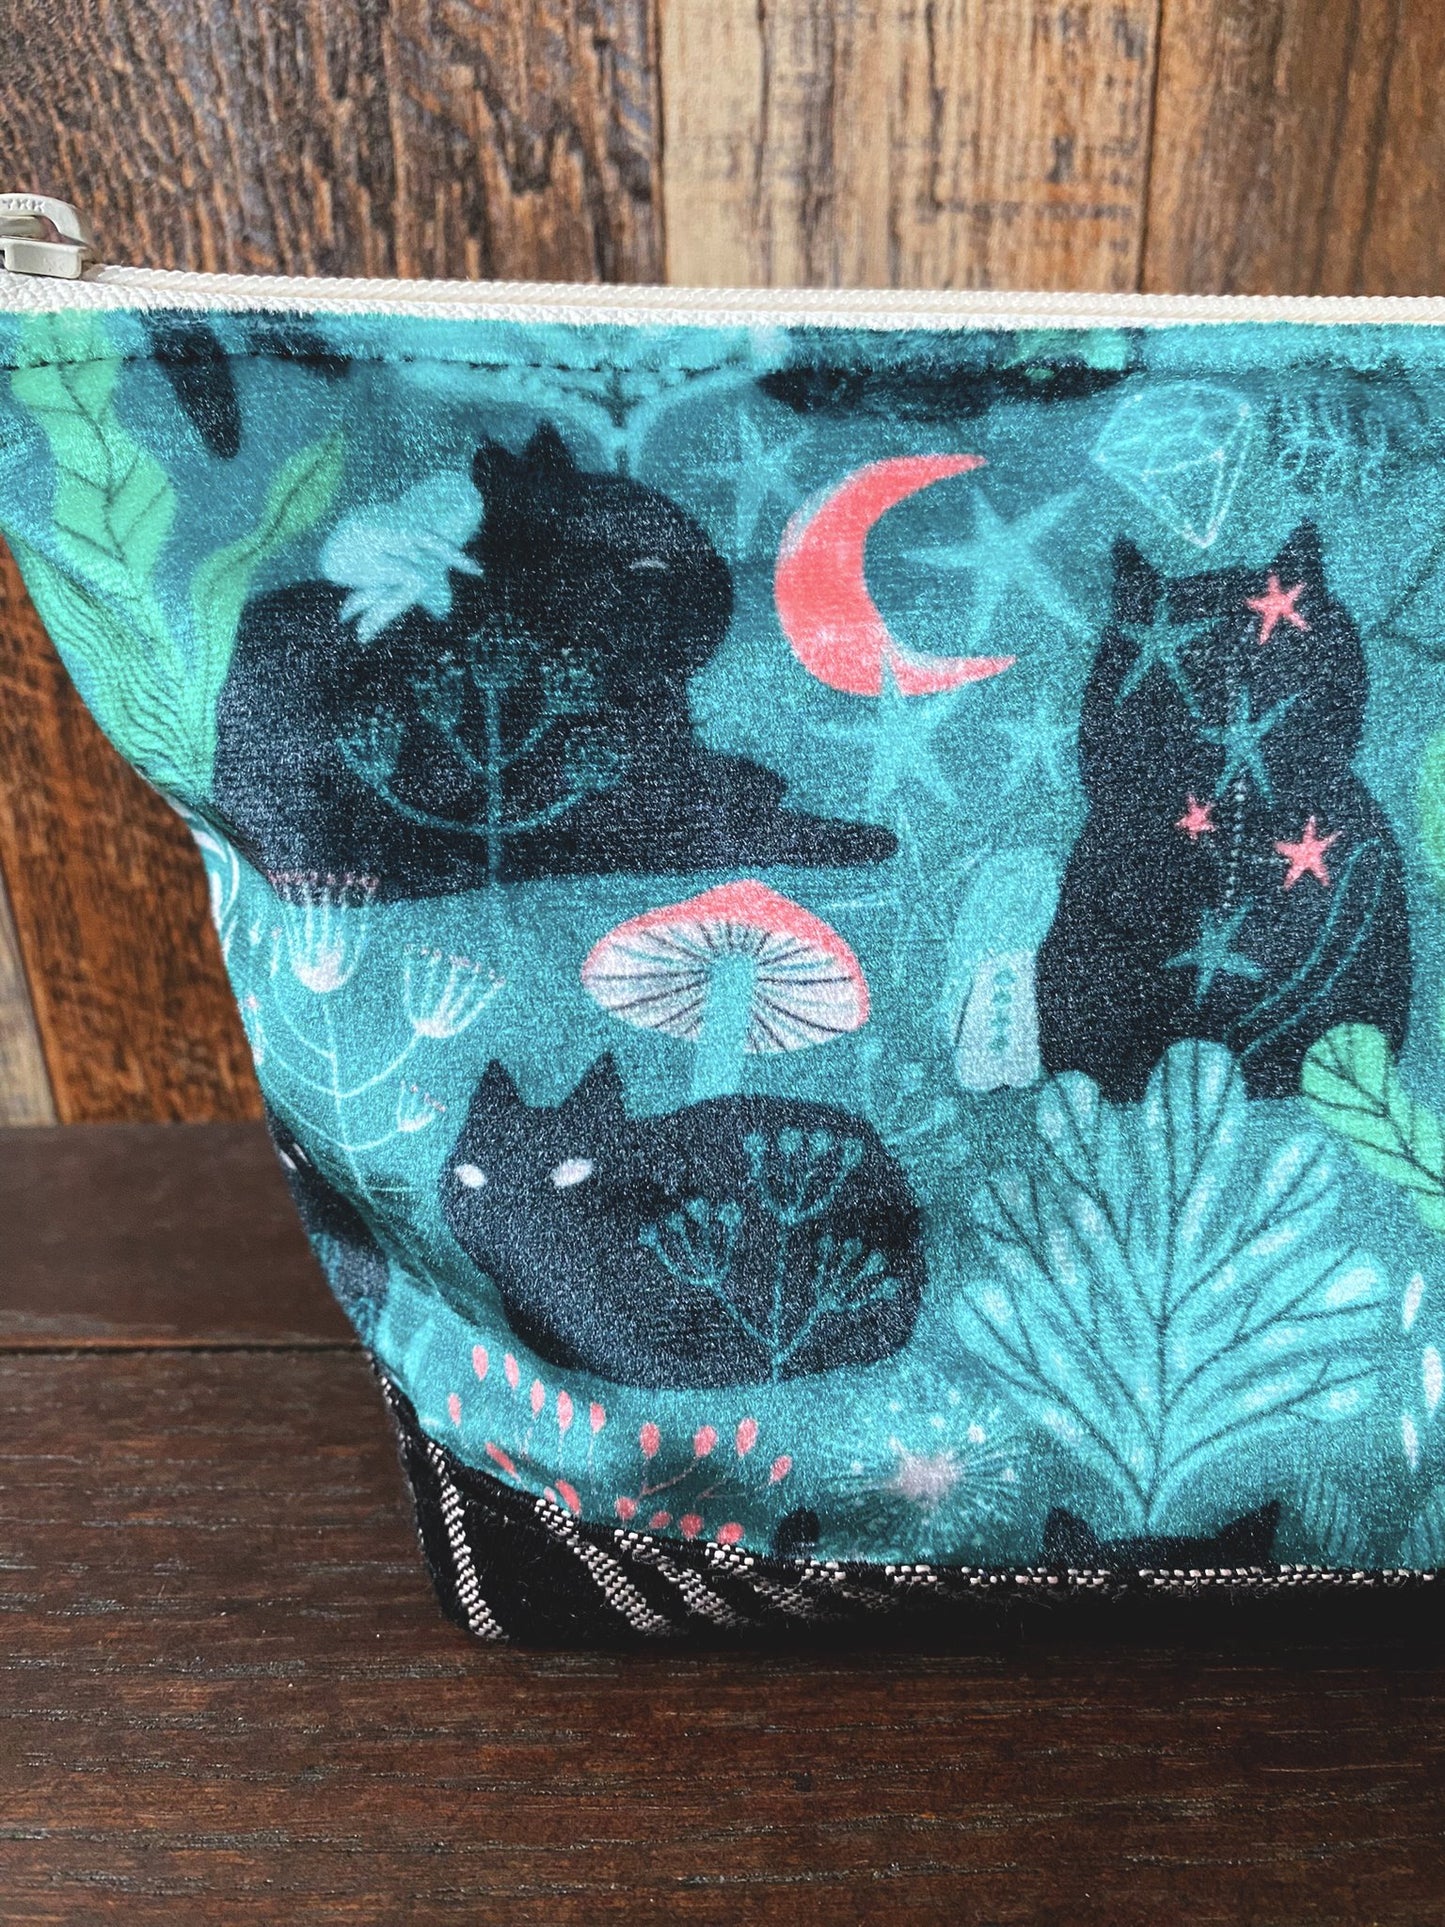 Moonlit Cats Open Wide Spindle Bags